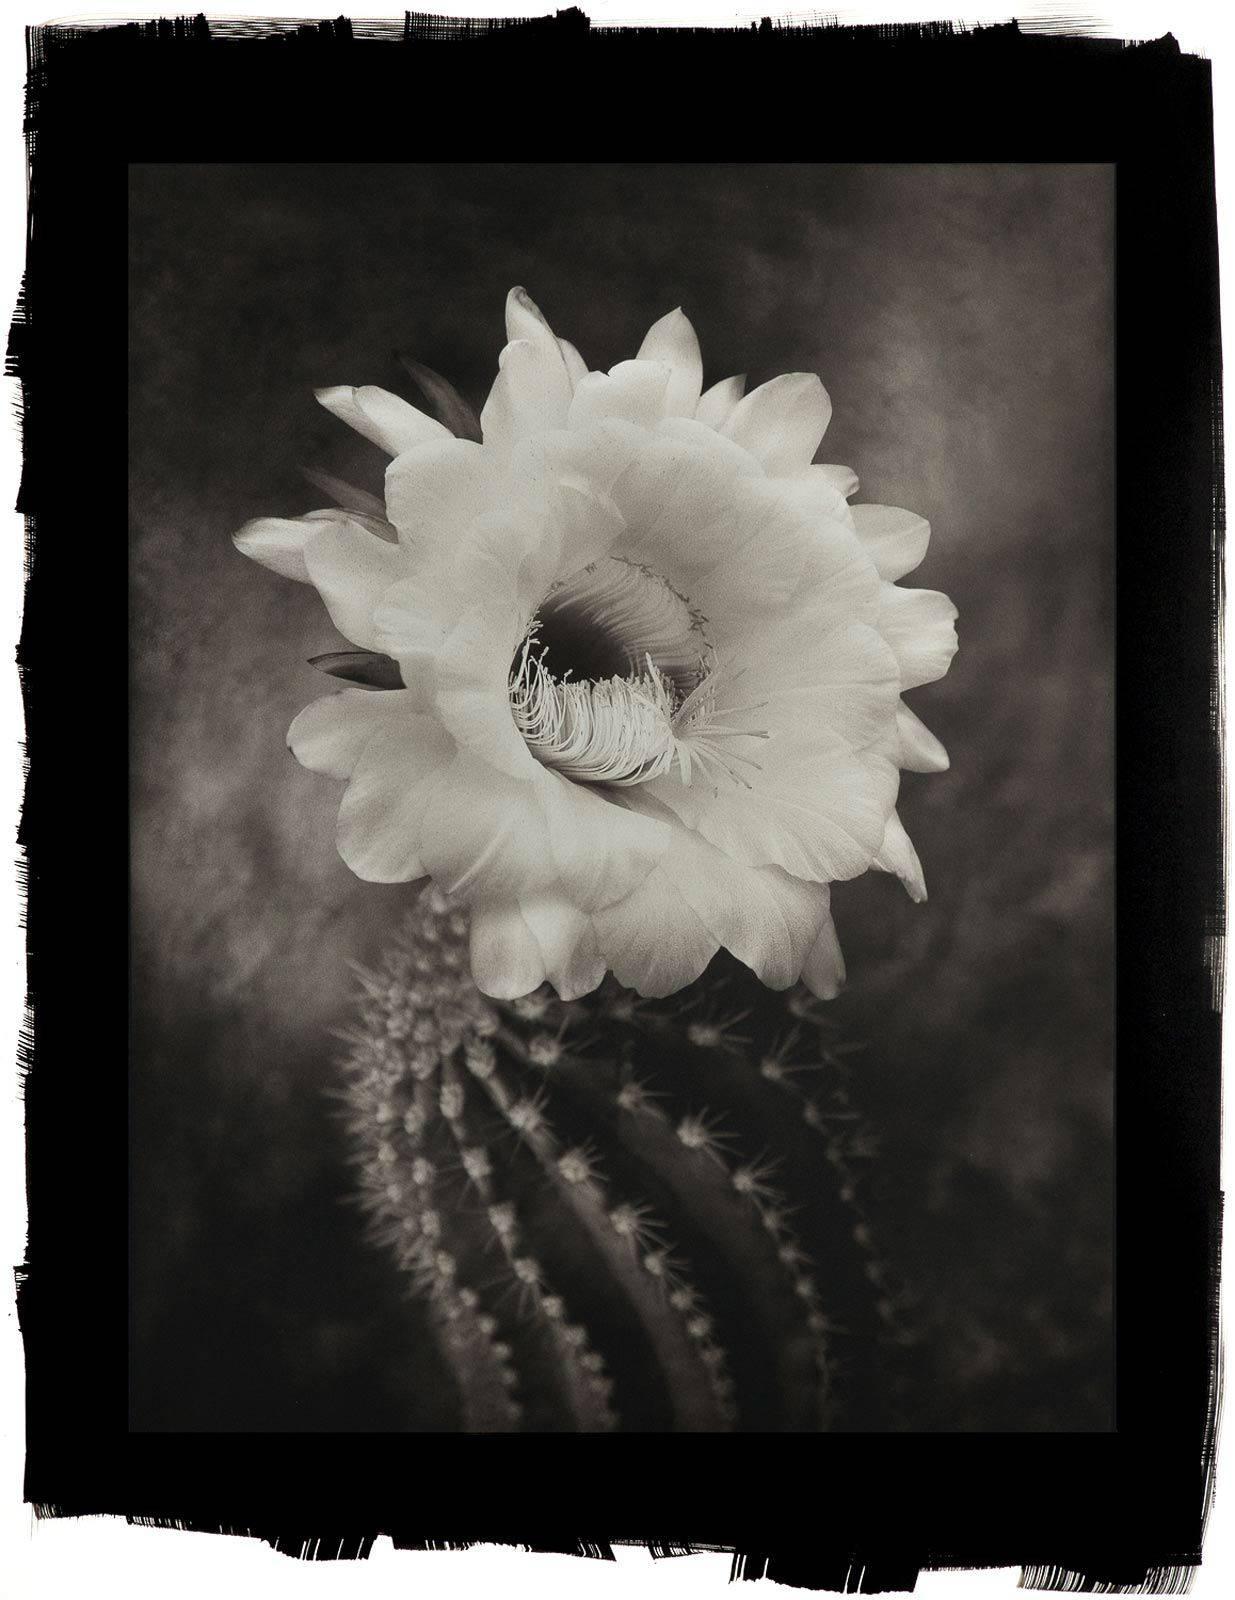 Cy DeCosse Black and White Photograph - Argentine Giant Cactus, 2012